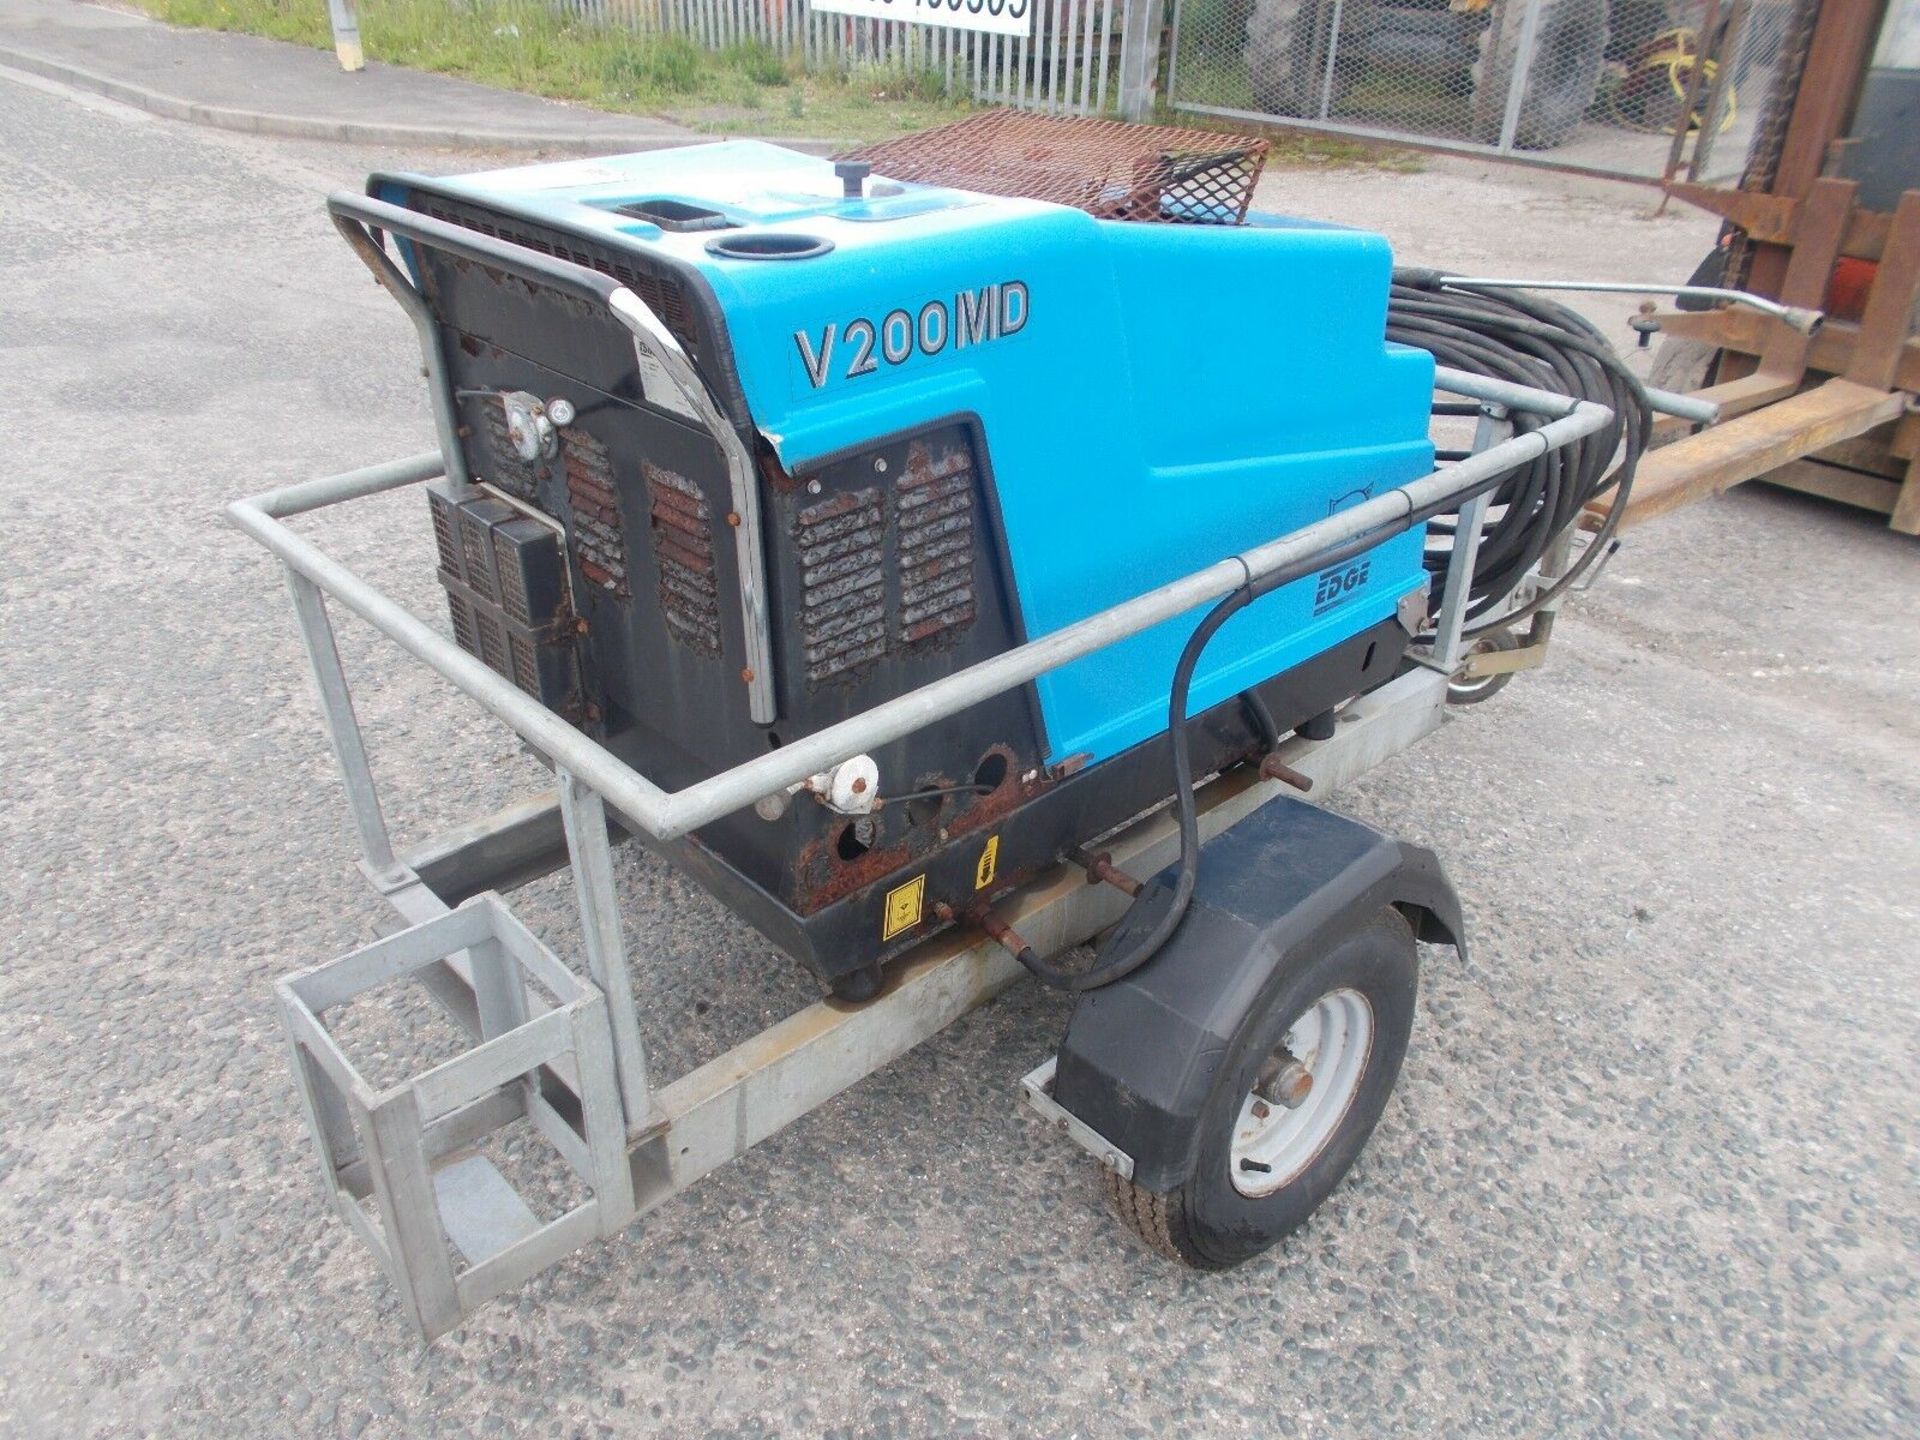 Edge V 200 MD Towable Hot and Cold Diesel Engined Pressure Washer - Image 7 of 7